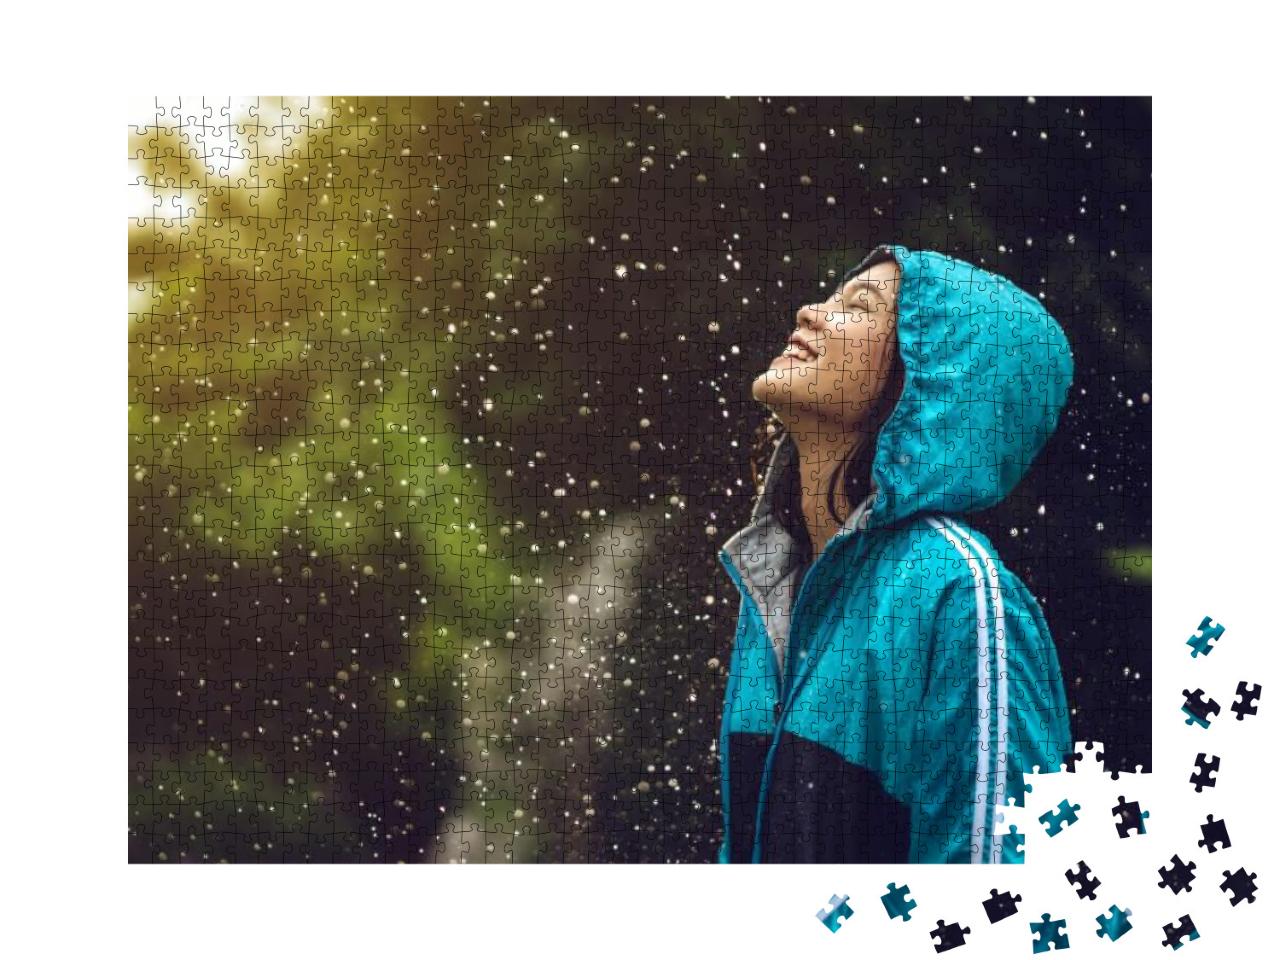 Asian Woman Wearing a Raincoat Outdoors. She is Happy... Jigsaw Puzzle with 1000 pieces